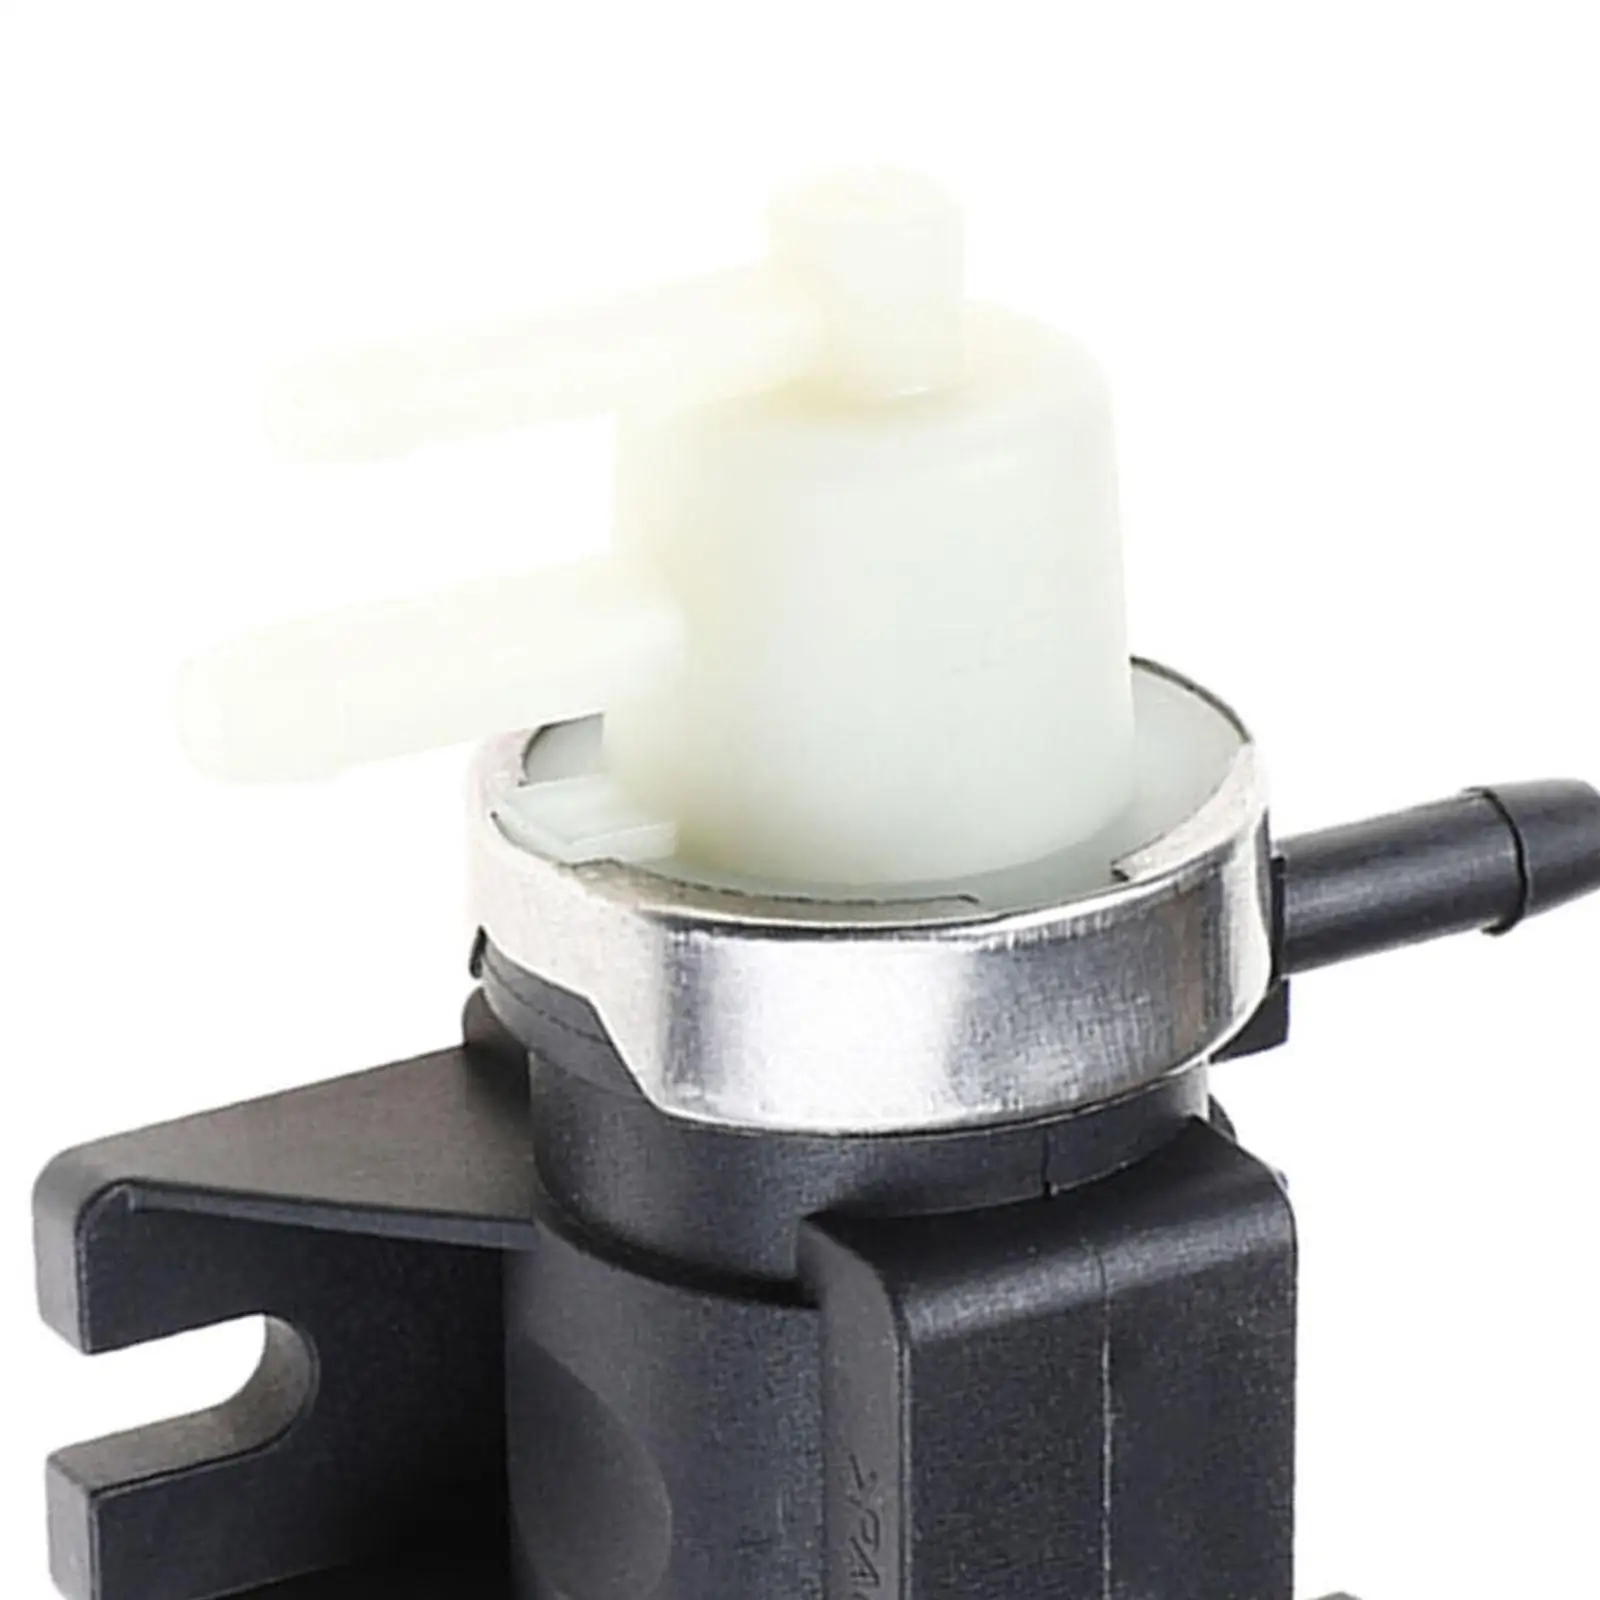 Boost Control Solenoid 1J0906627A Vacuum Fit for  Golf Caddy for Beetle